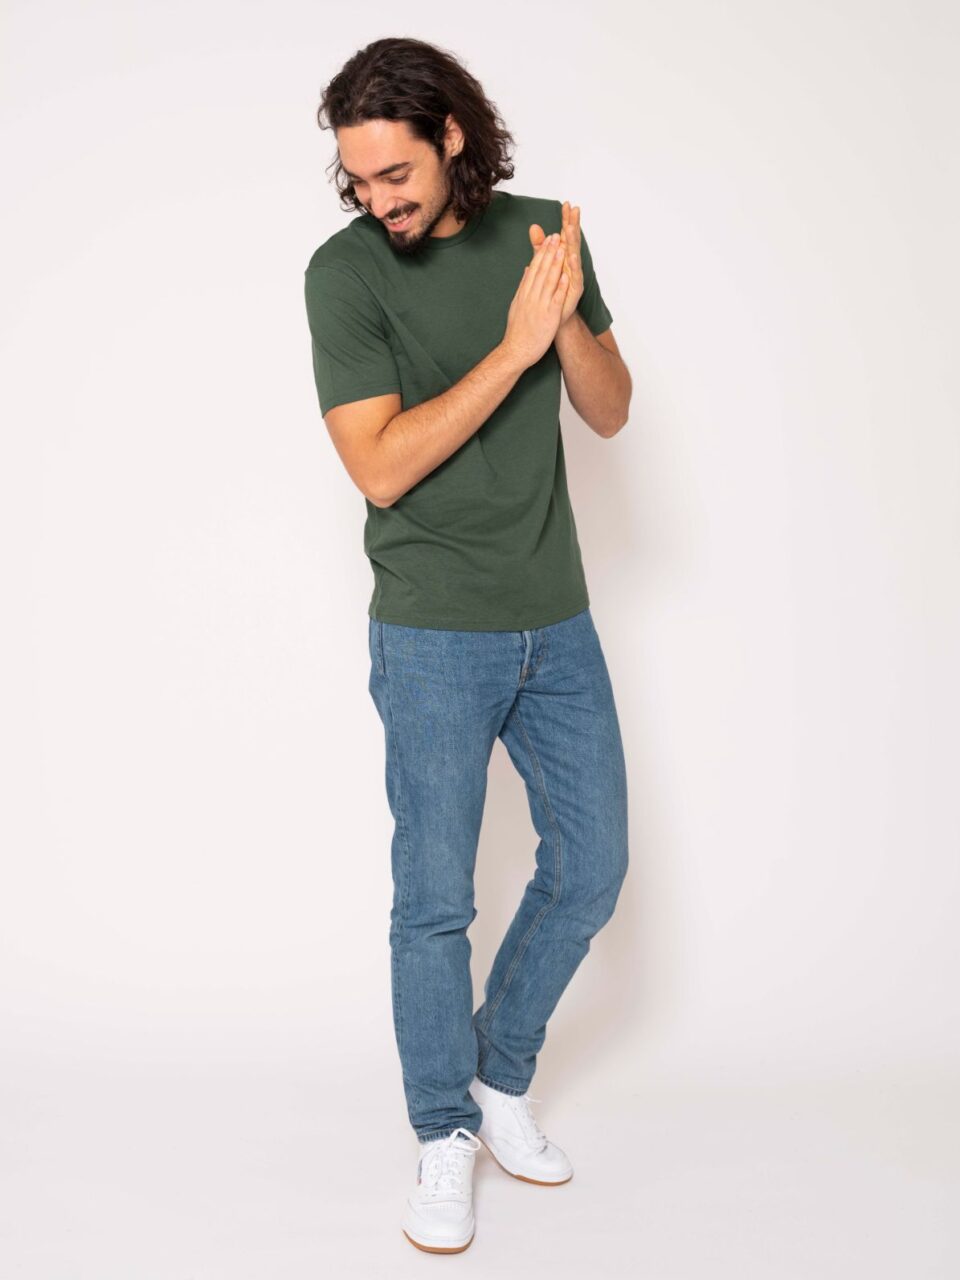 STROM_basic-collection_forest-green_shirt